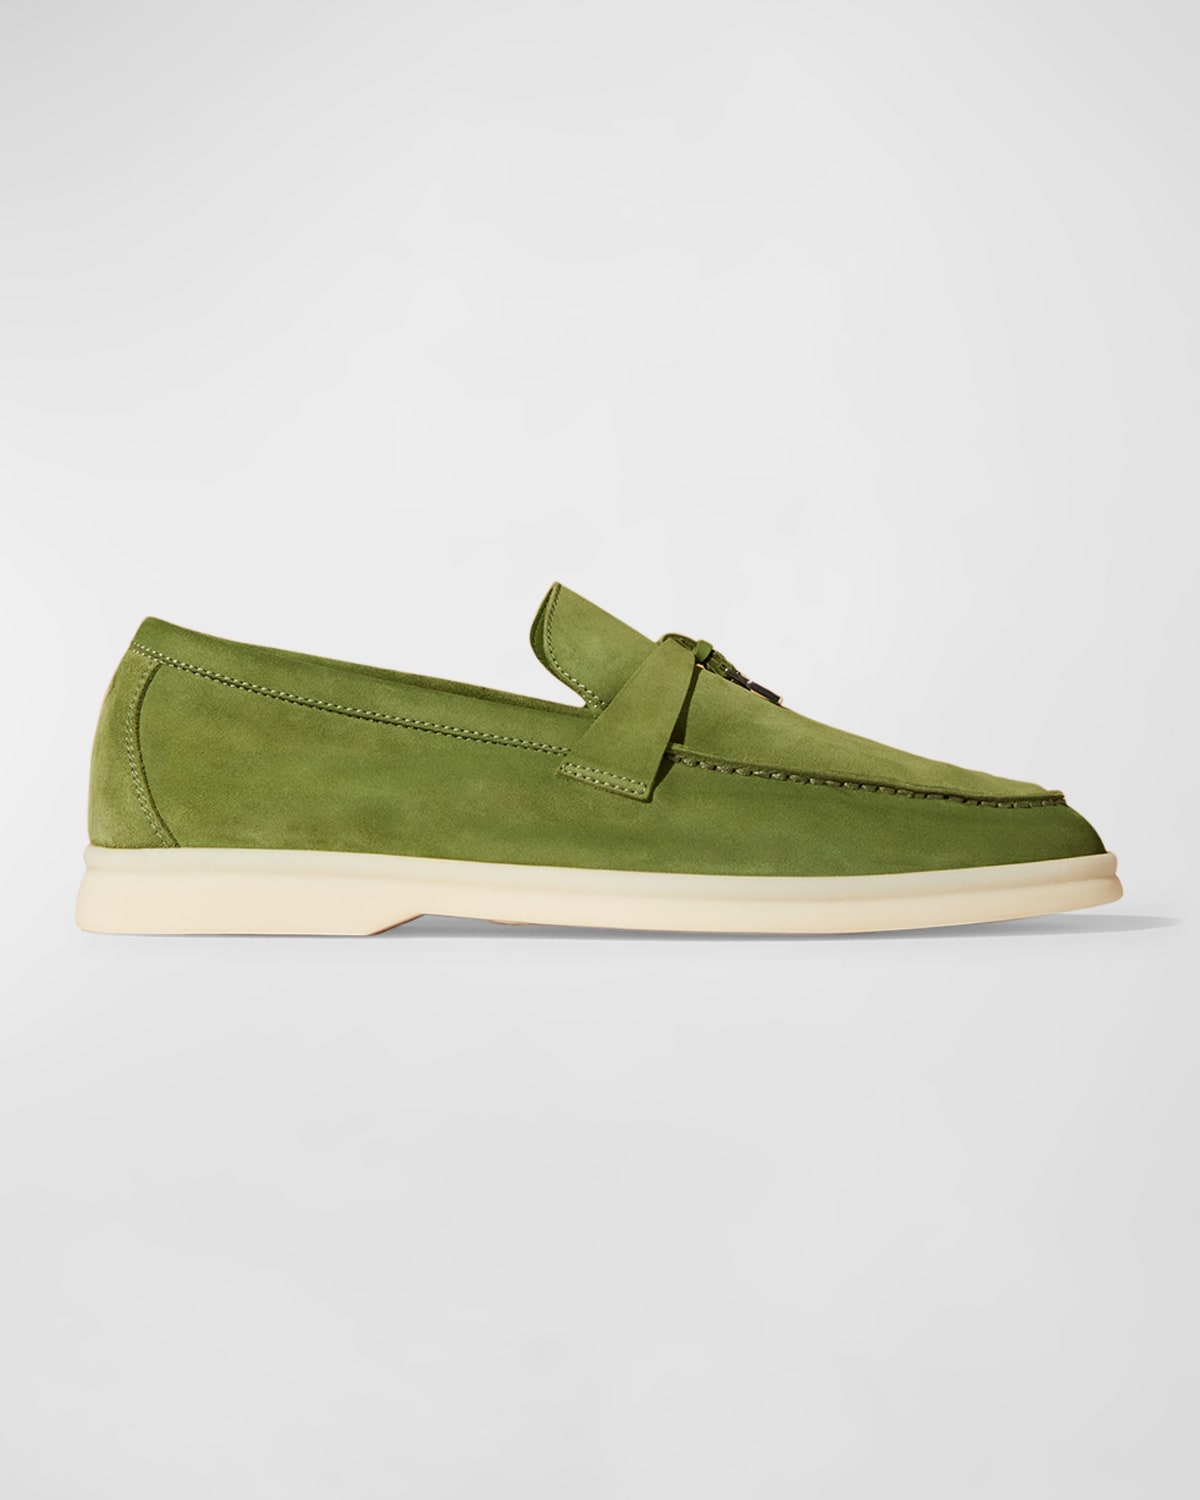 Loro Piana Summer Charms Walk Suede Loafers In Matcha Powder